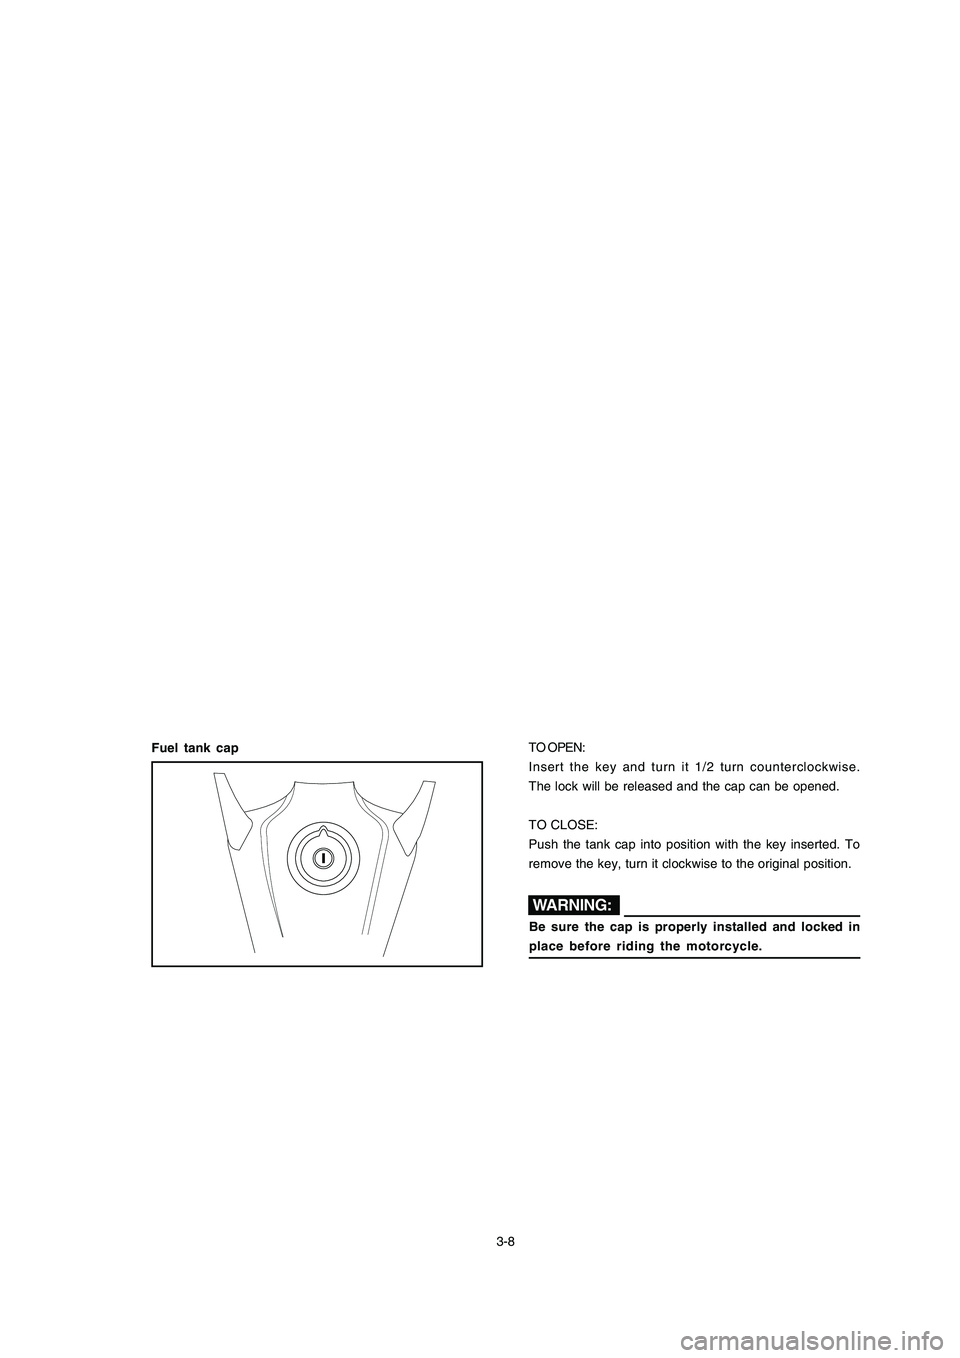 YAMAHA XTZ125 2008  Owners Manual 3-8
3-8
Fuel tank cap
Be sure the cap is properly installed and locked in
place before riding the motorcycle.
TO OPEN:
Insert the key and turn it 1/2 turn counterclockwise.
The lock will be released a